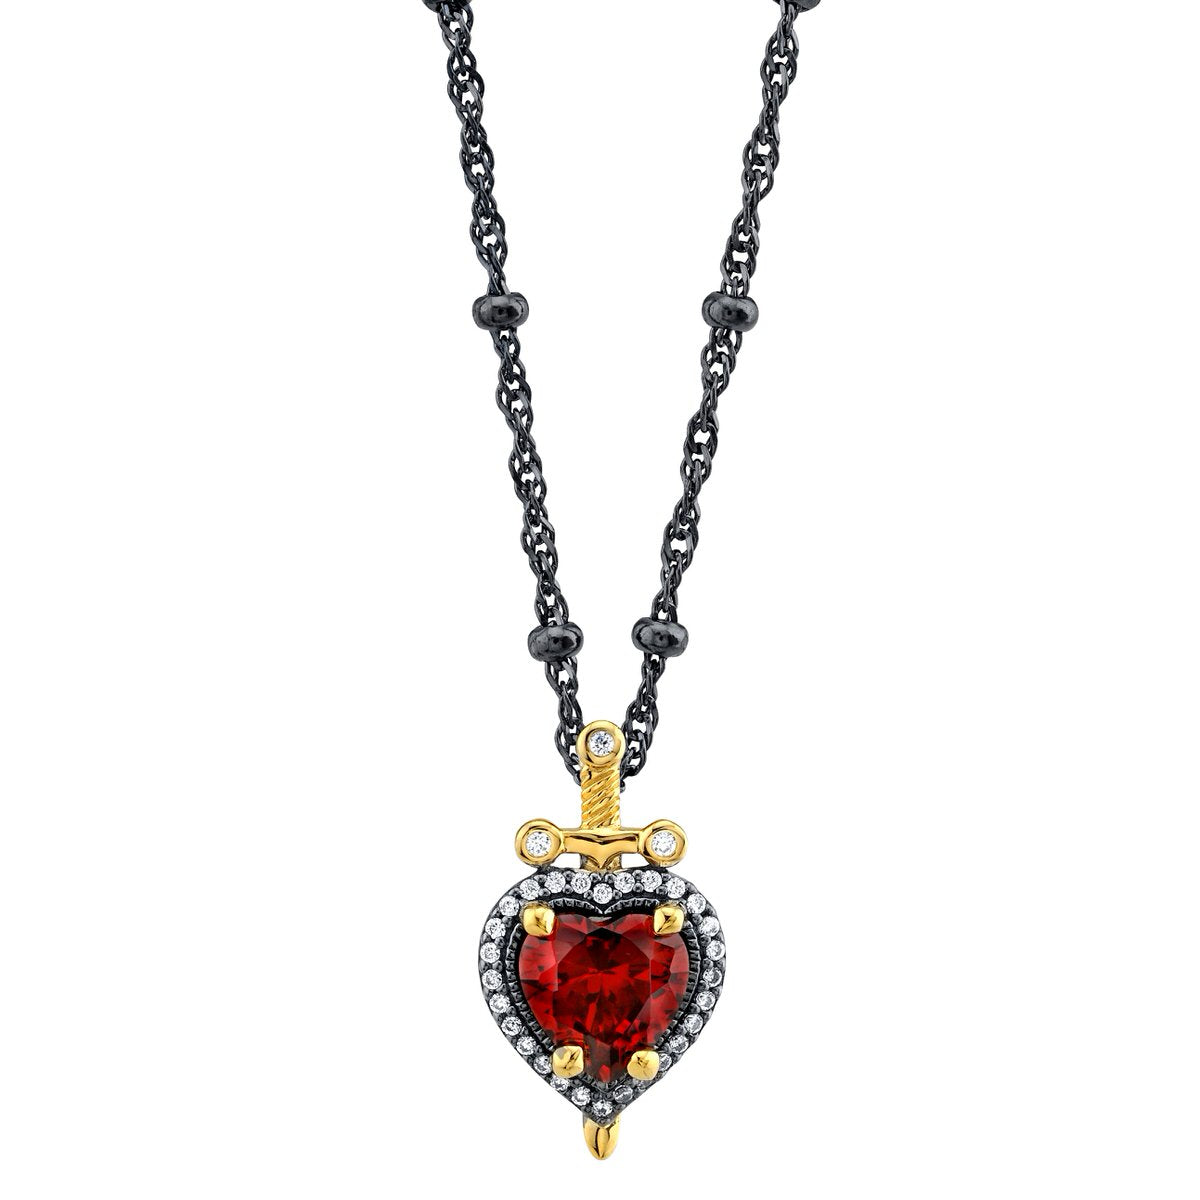 Snow White Heart & Dagger Necklace – Stage Nine Entertainment Store